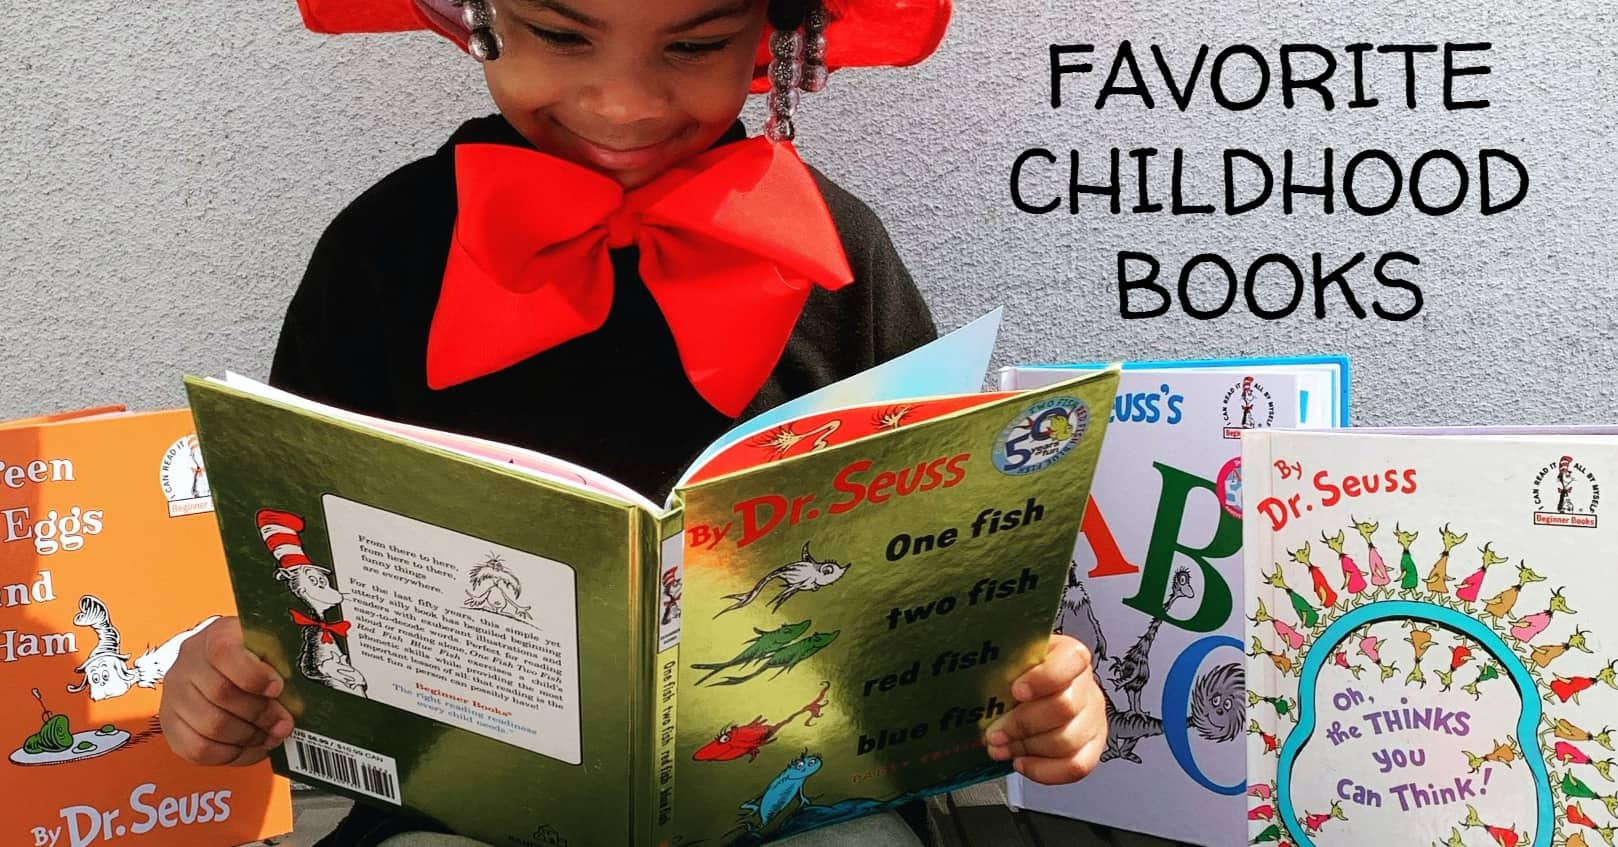 What Was Your Favorite Childhood Book?